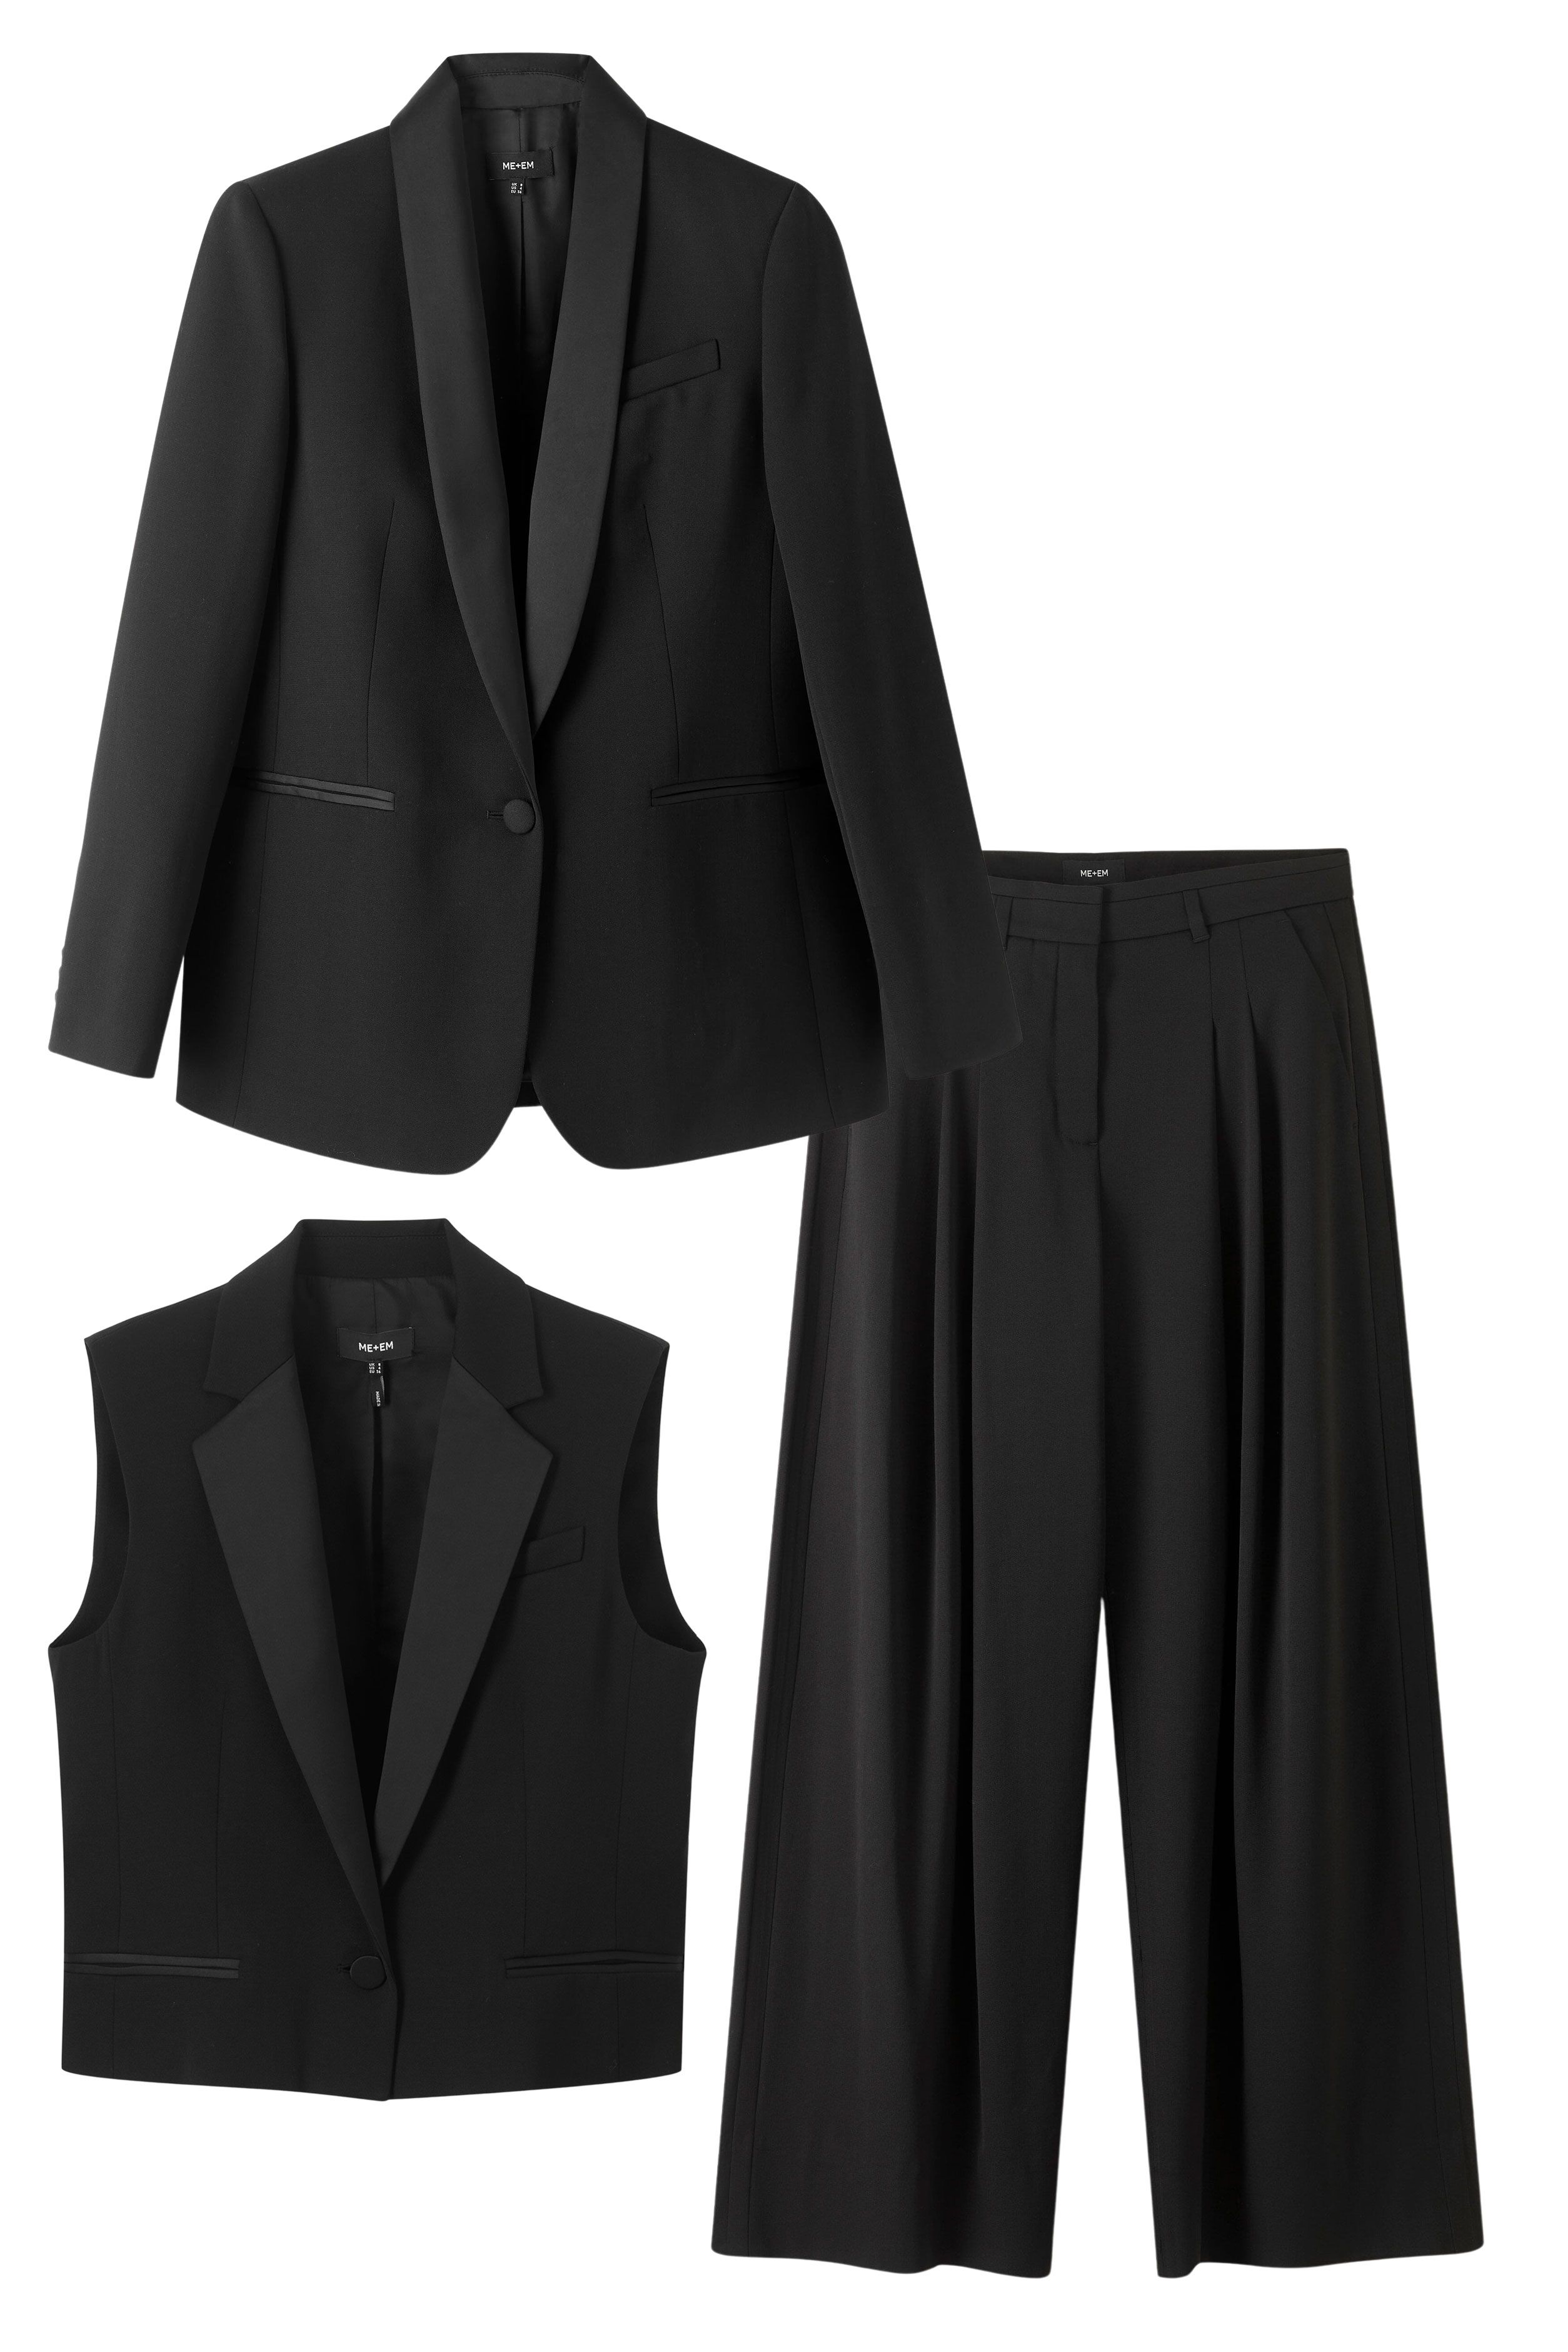 21 Best Women's Trouser Suits & Ladies Trouser Suits for Workwear, Weddings  & Weekend | Glamour UK